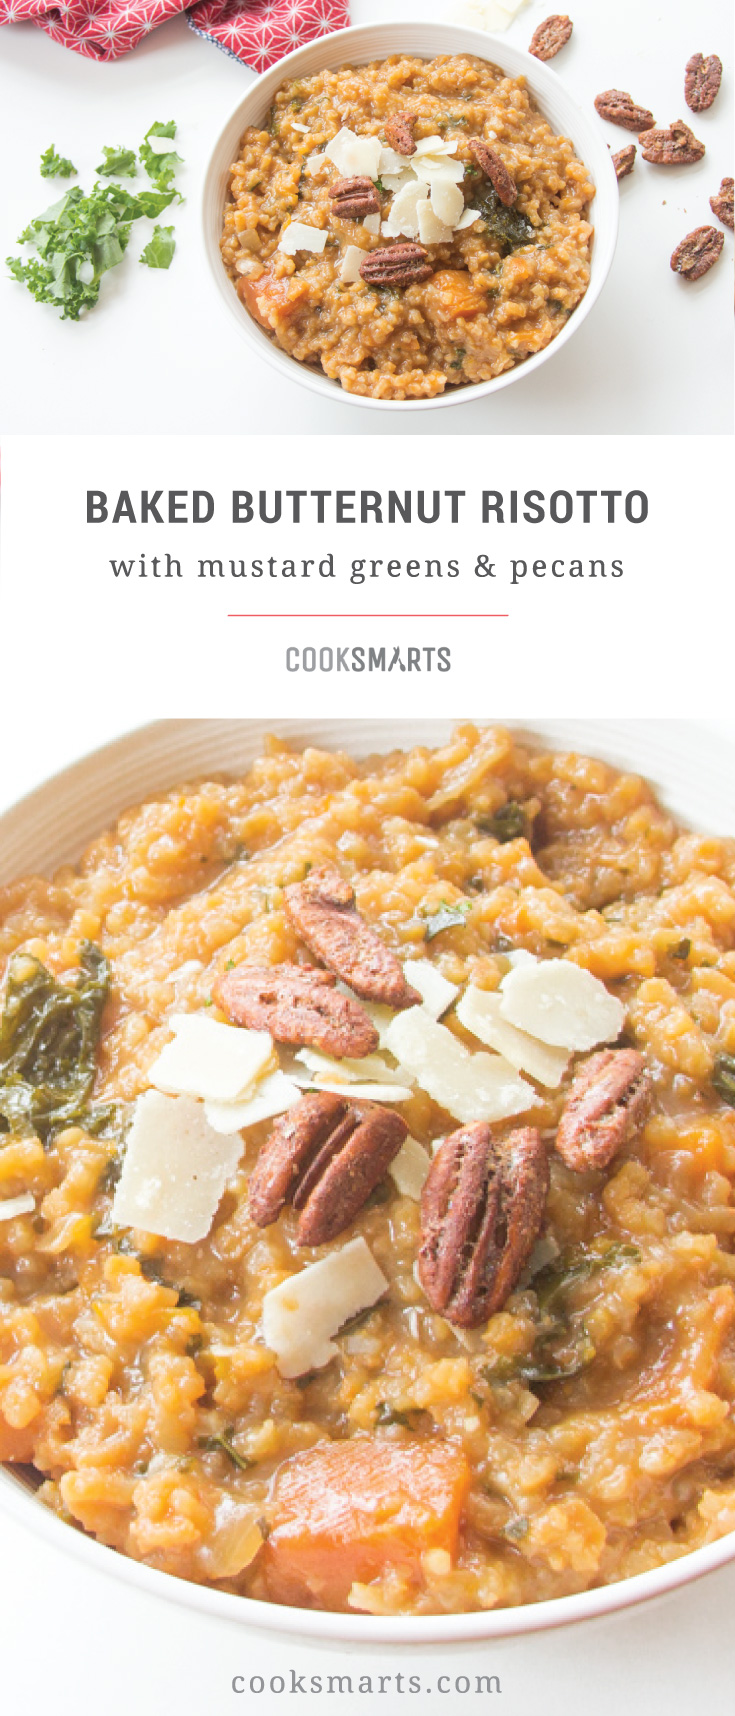 Cook Smarts Recipe: Baked Butternut Squash Risotto with Mustard Greens & Pecans